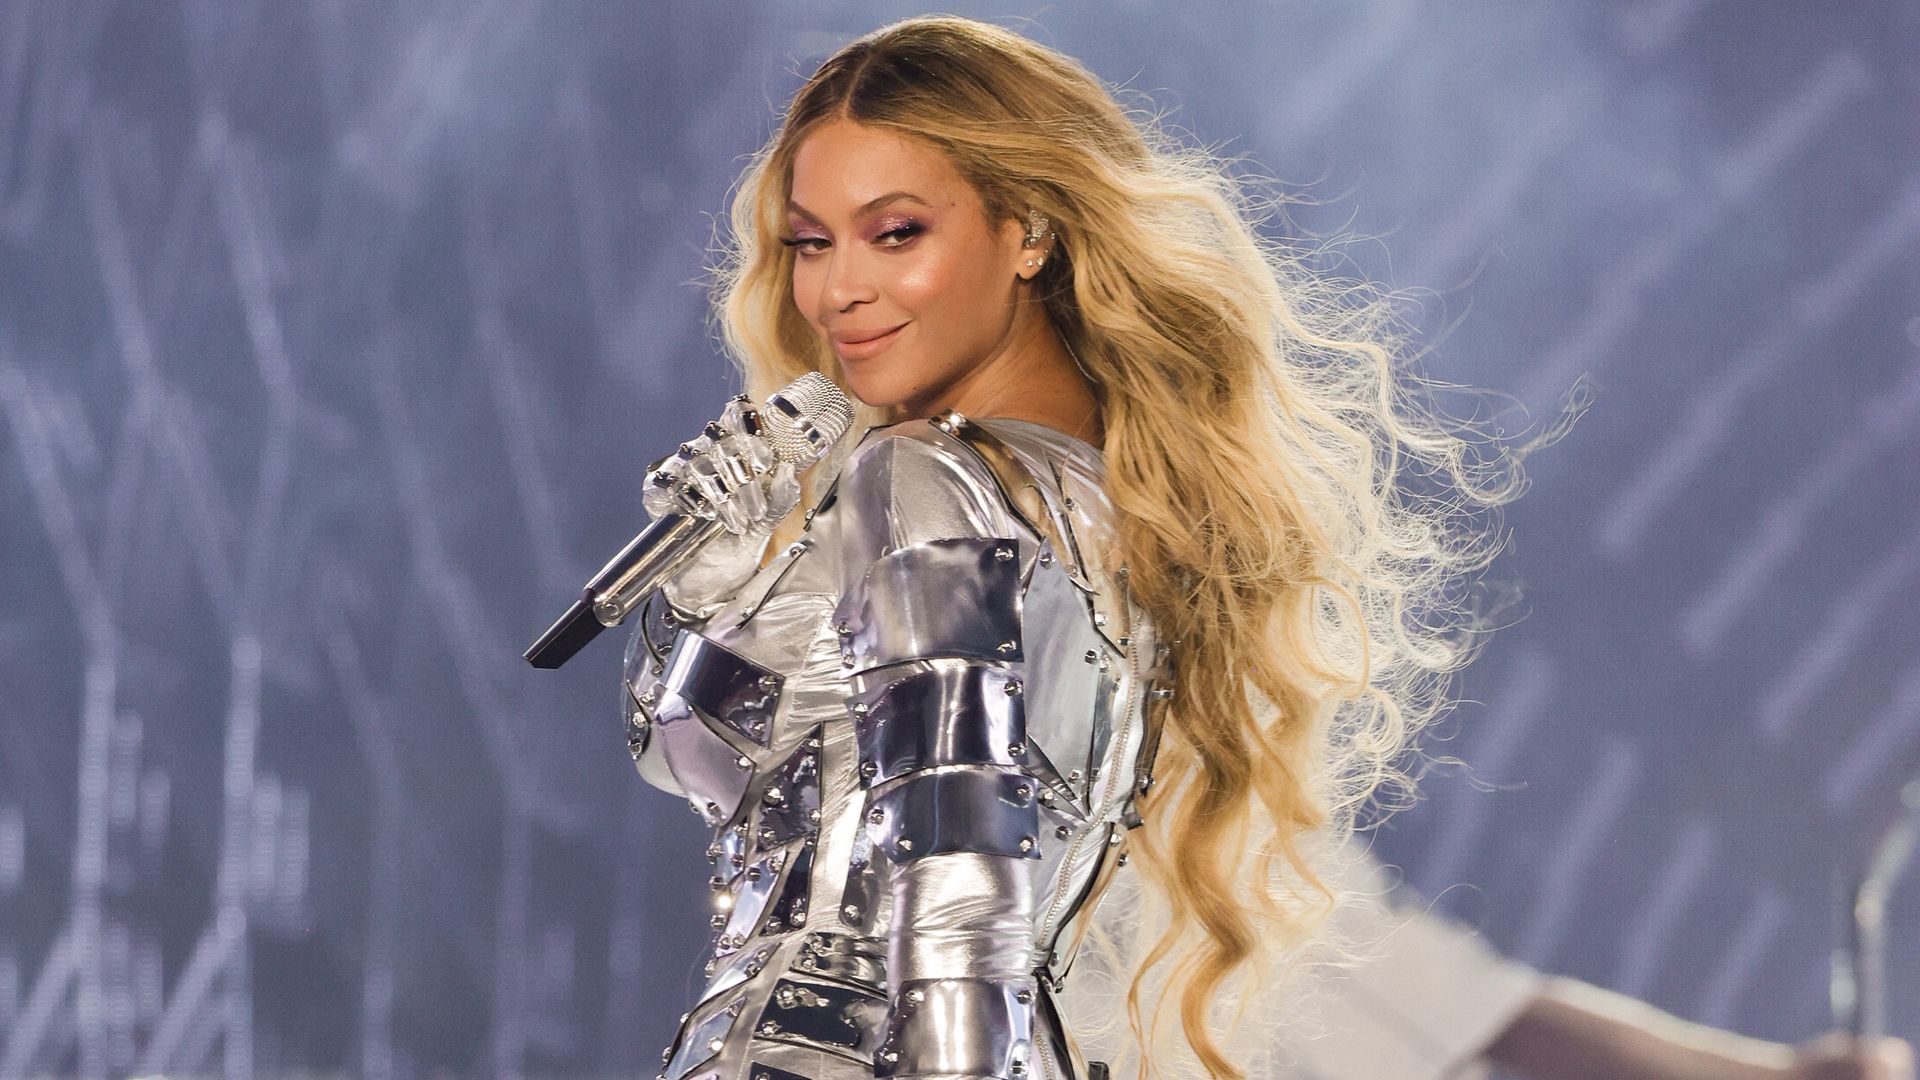 Fans Credit Beyoncé's 'Black Mama' Parenting Style for 'Well